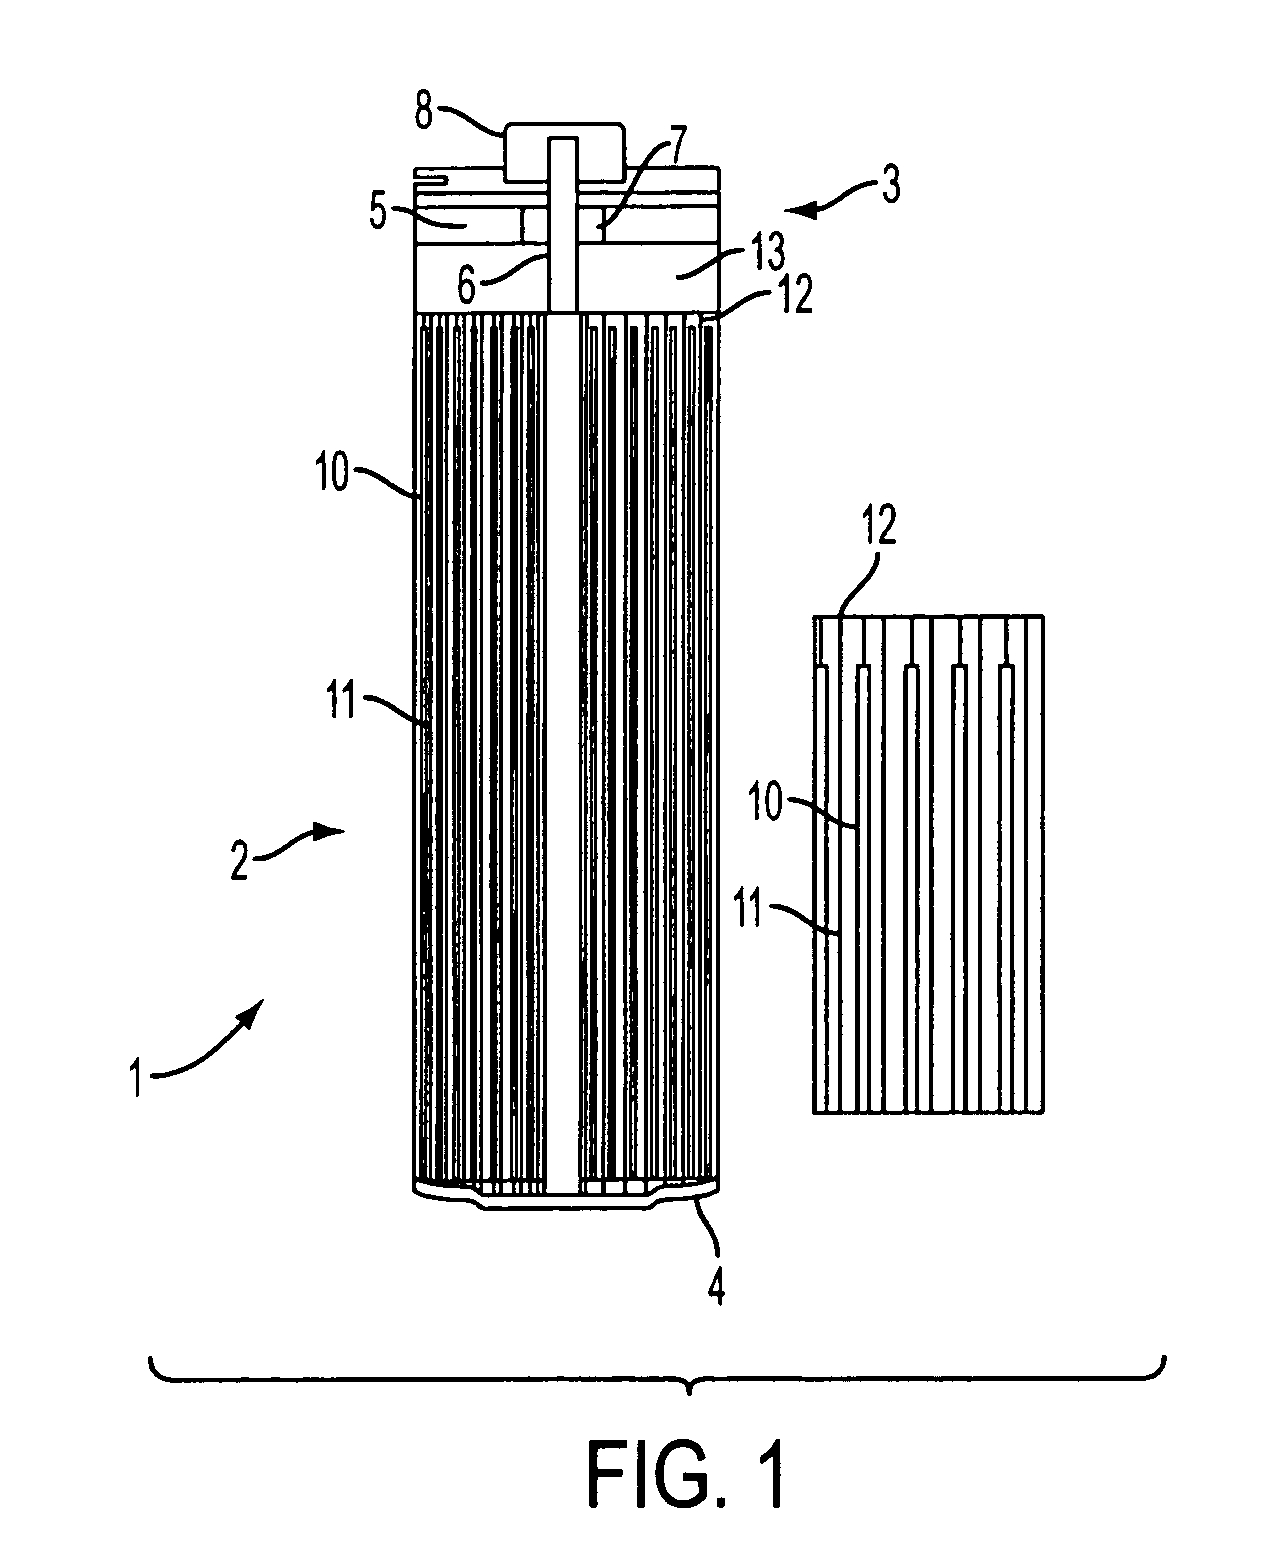 Electrochemical generator with a liquid cathode